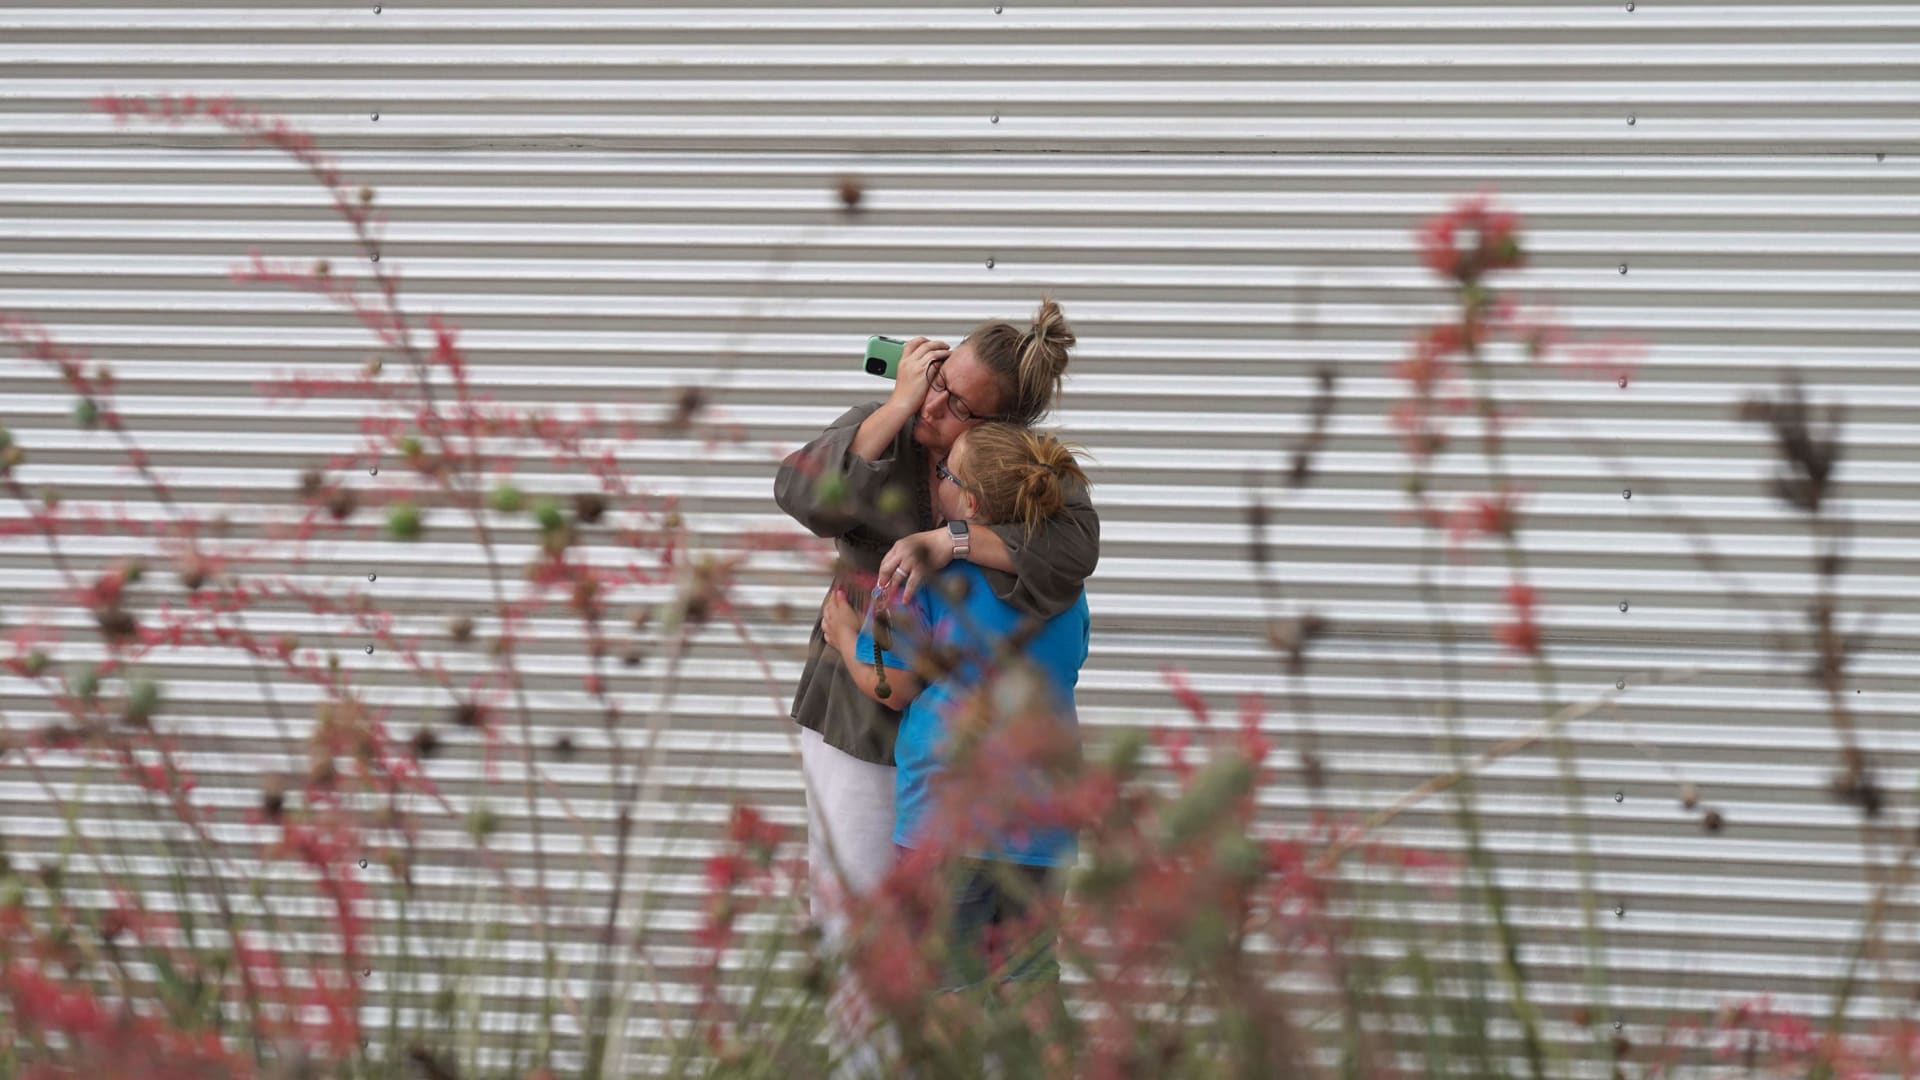 On May 24, a woman in Uvalde, Texas, cries and hugs a young girl while on the phone outside the Willie de Leon Civic Center where grief counseling will be offered.